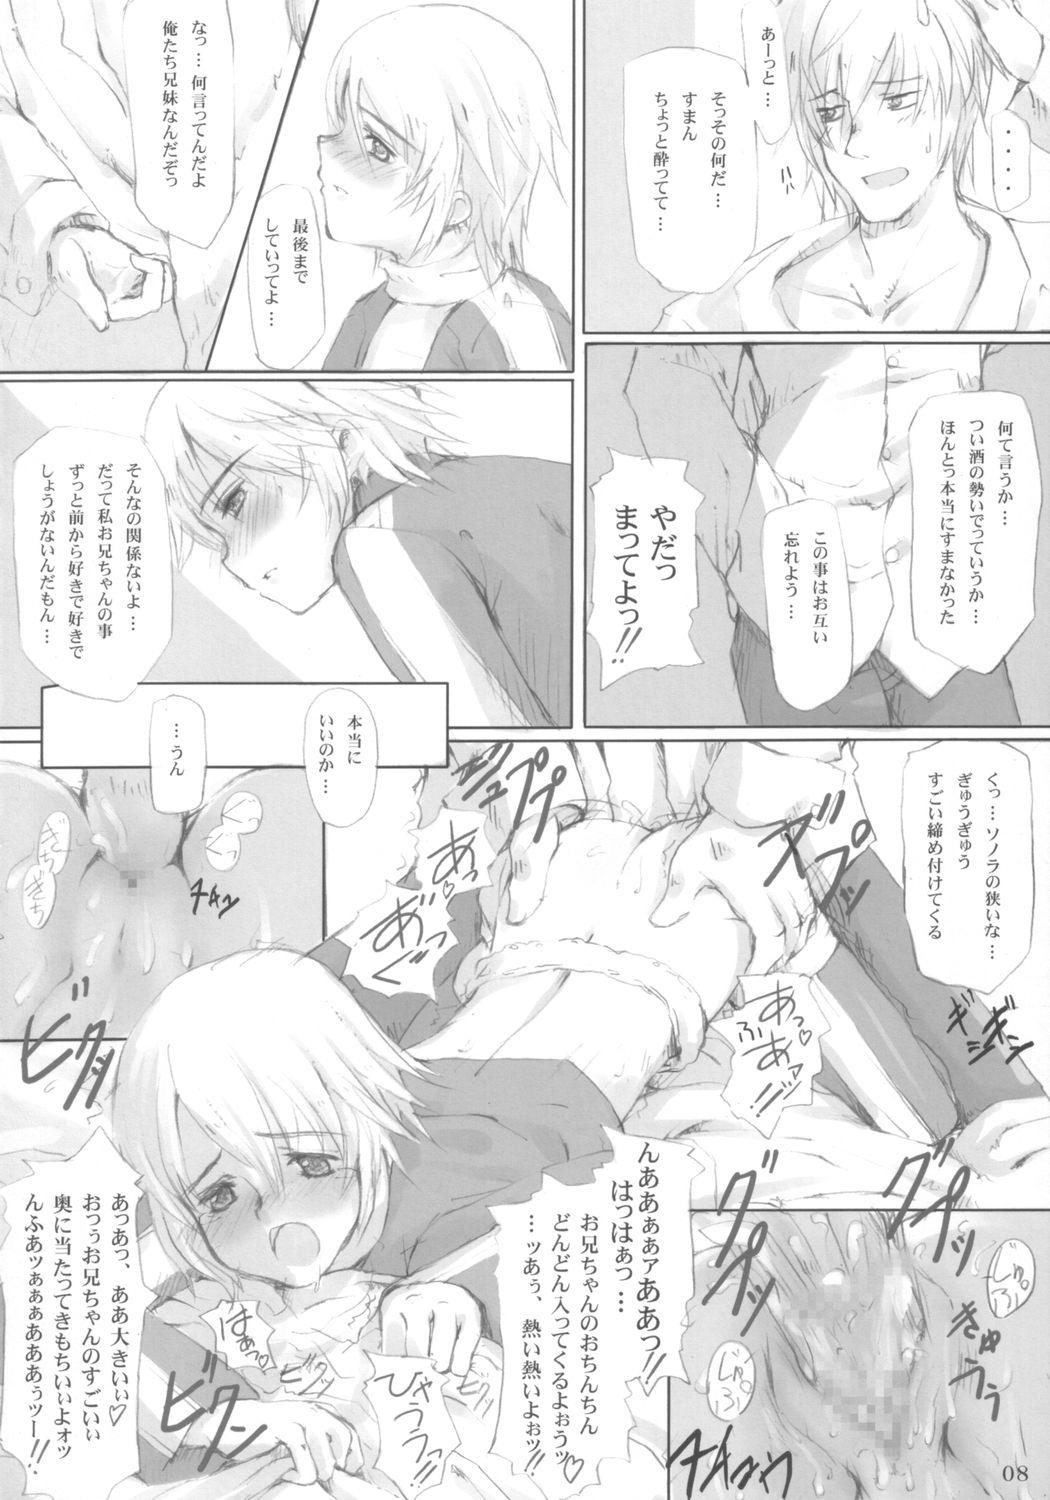 Pissing low calorie milk candy - Summon night Pain - Page 7